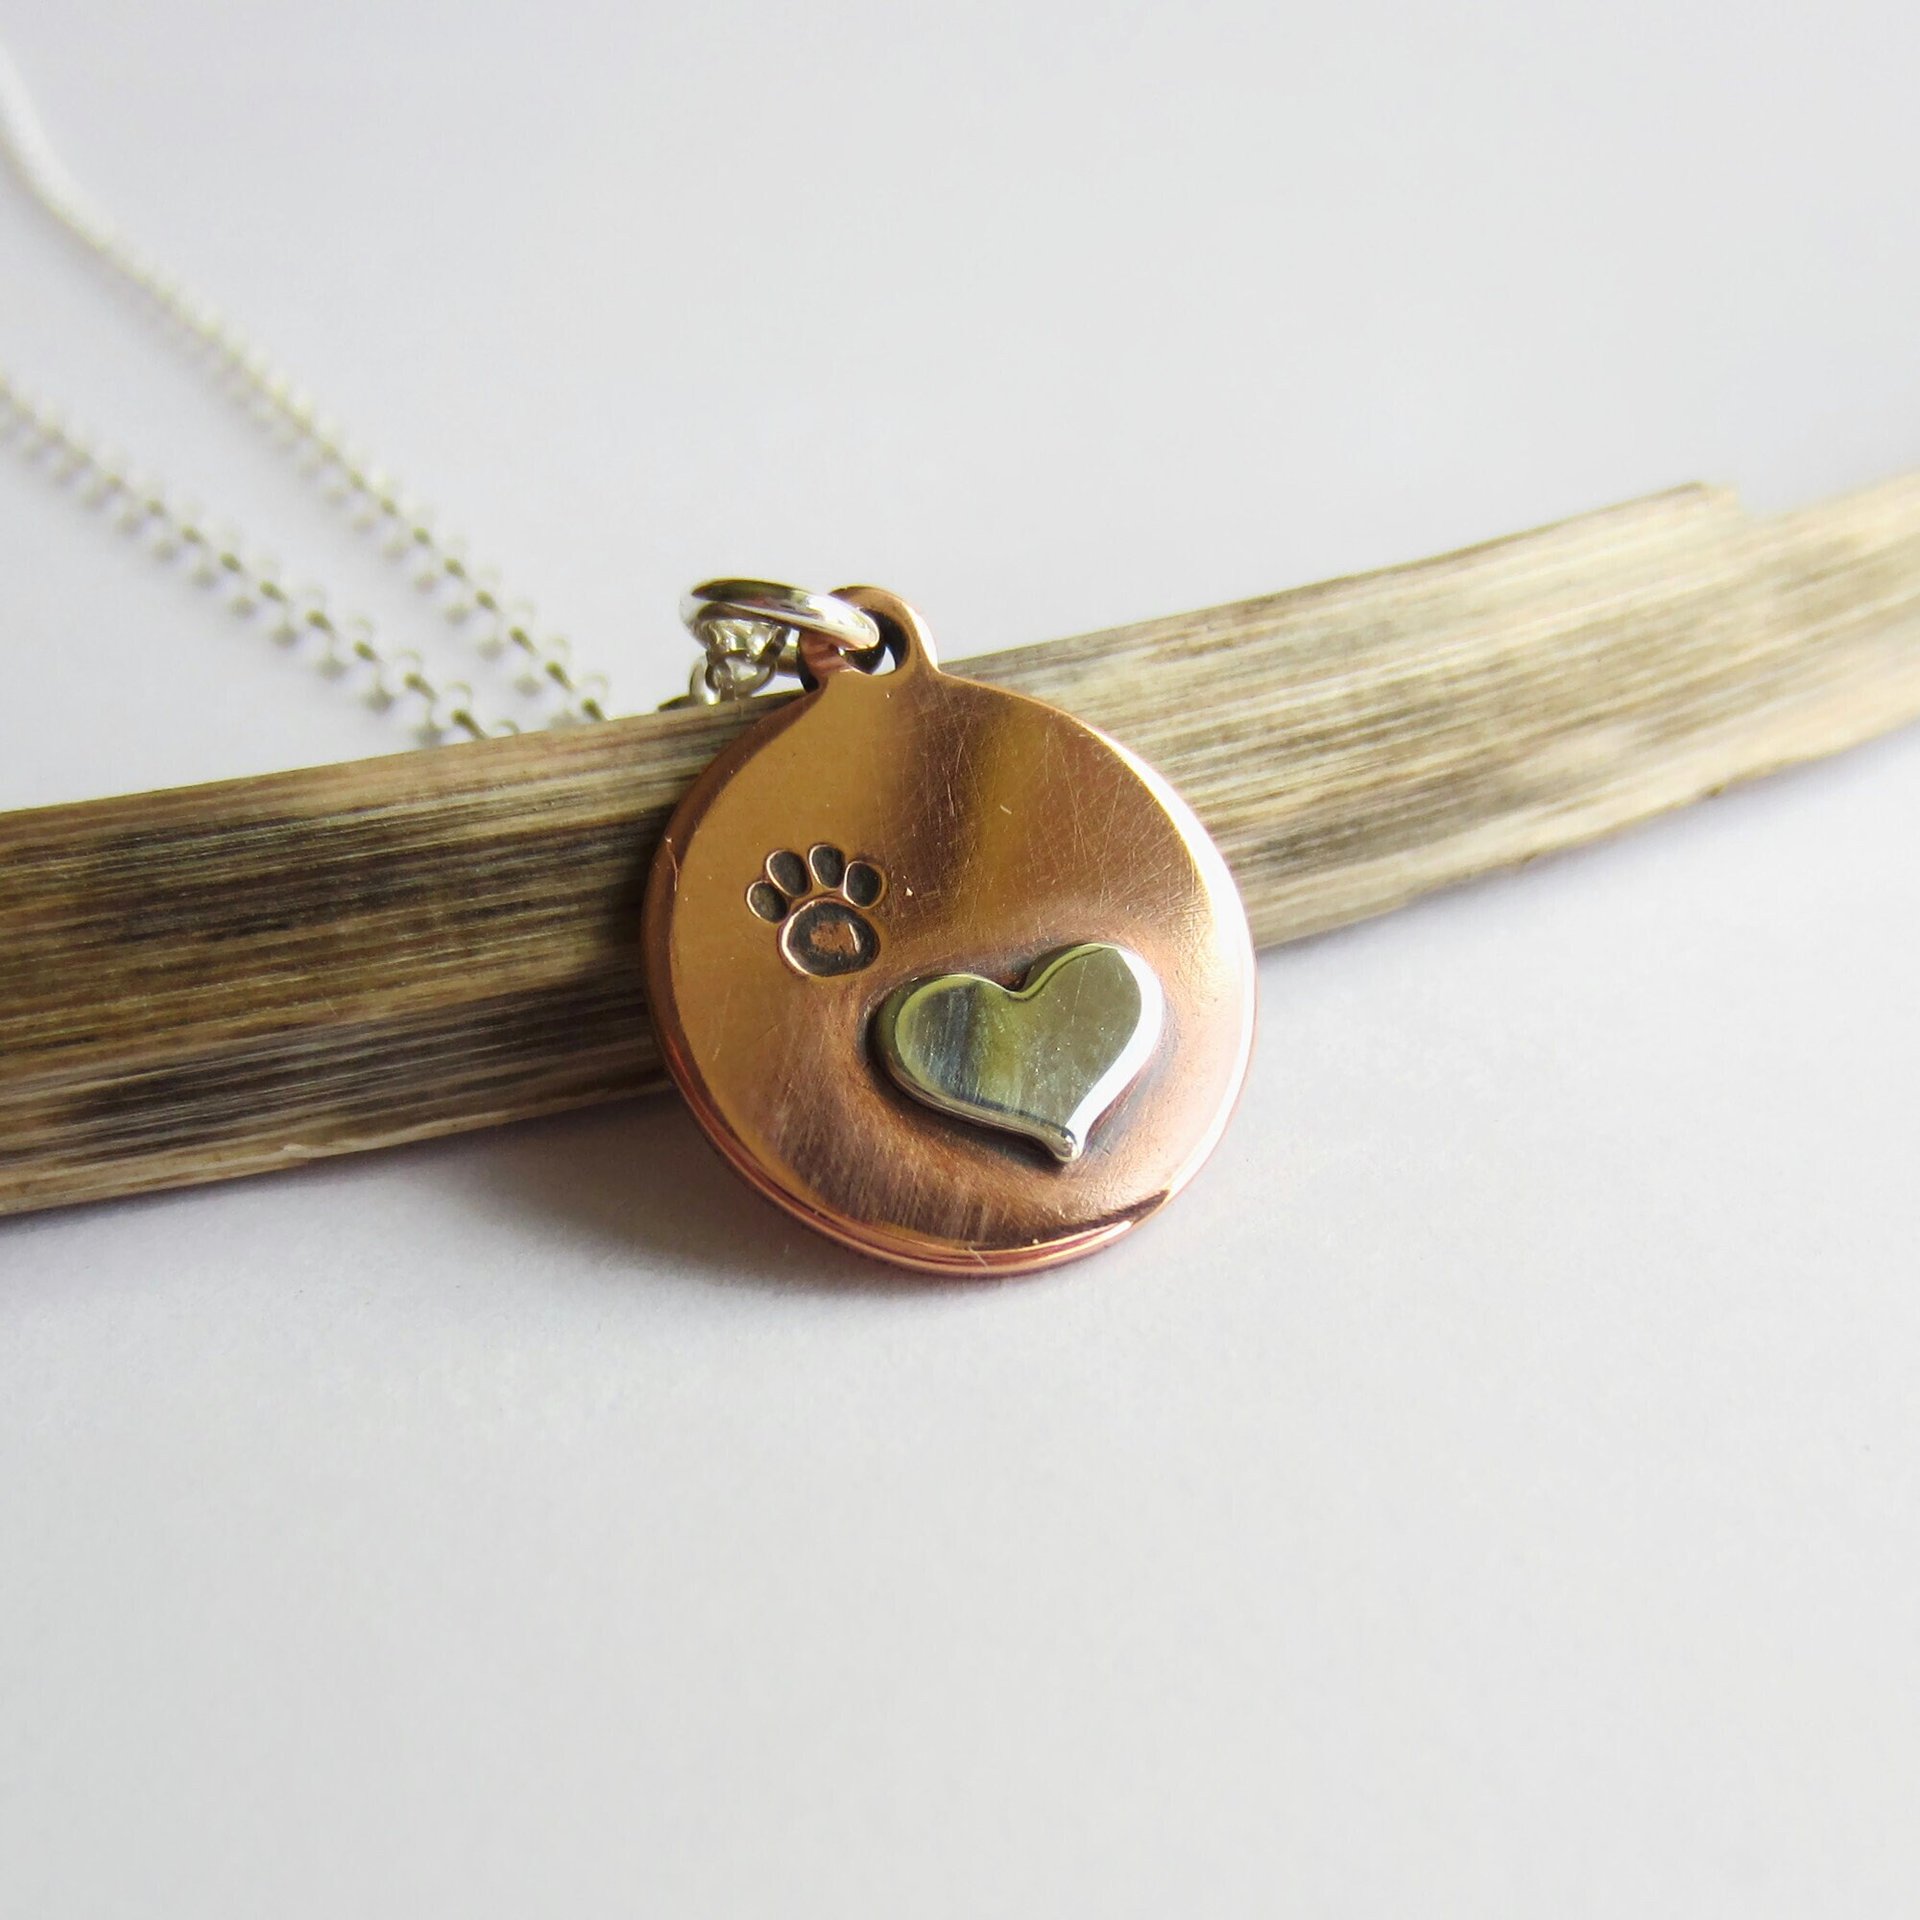 Paw Print and Heart Copper and Sterling Silver Necklace ~ Handmade by The Tiny Tree Frog Jewellery